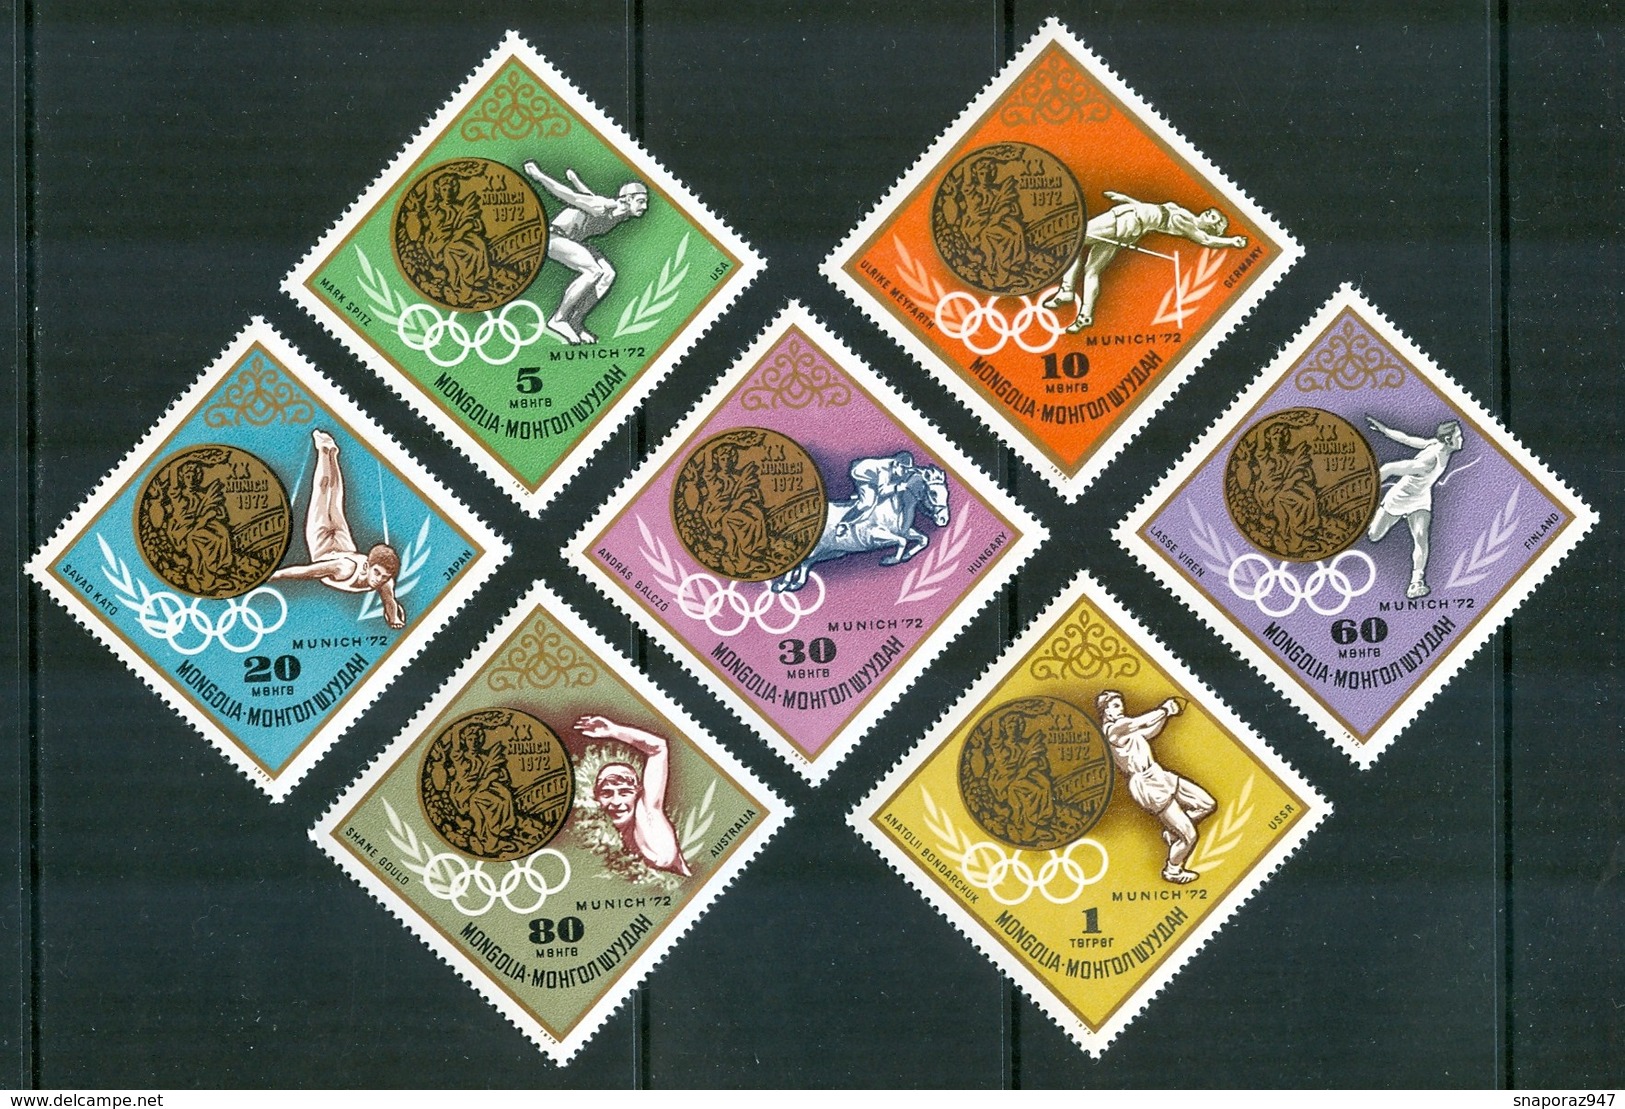 1972 Mongolia "Munich 72" Medals Winner Olimpiadi Olympics Games Jeux Olympiques MNH** Lux46 - Mongolie